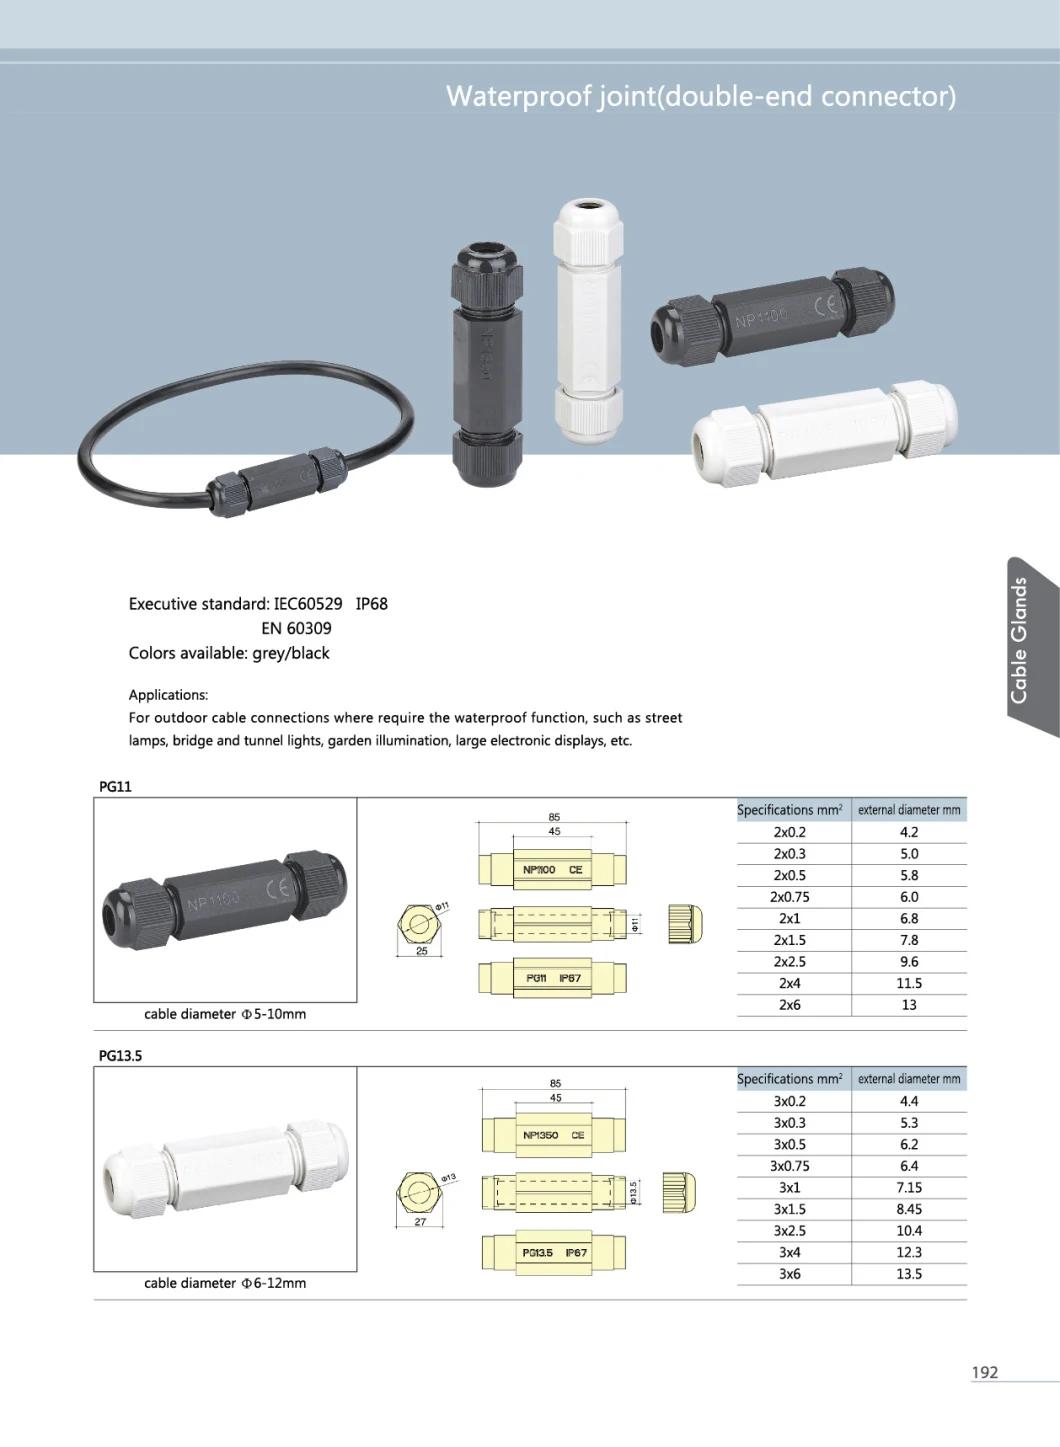 for Outdoor Cable Connections Where Require The Waterproof Function (double-end connector) Waterproof Joint